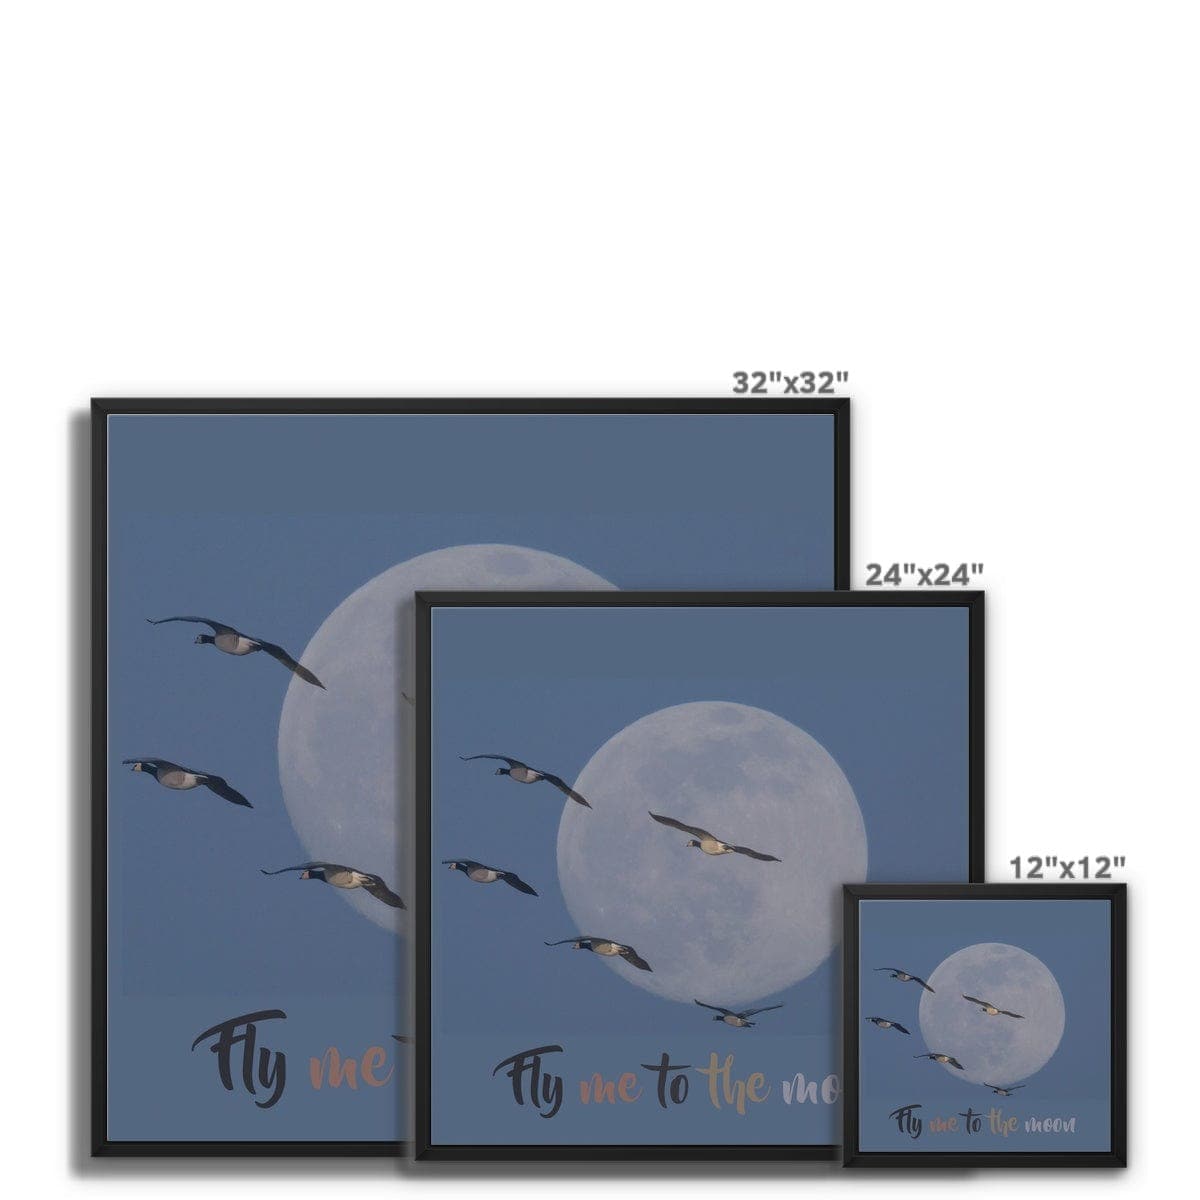 Fly me to the moon, Framed Canvas, by Sensus Studio